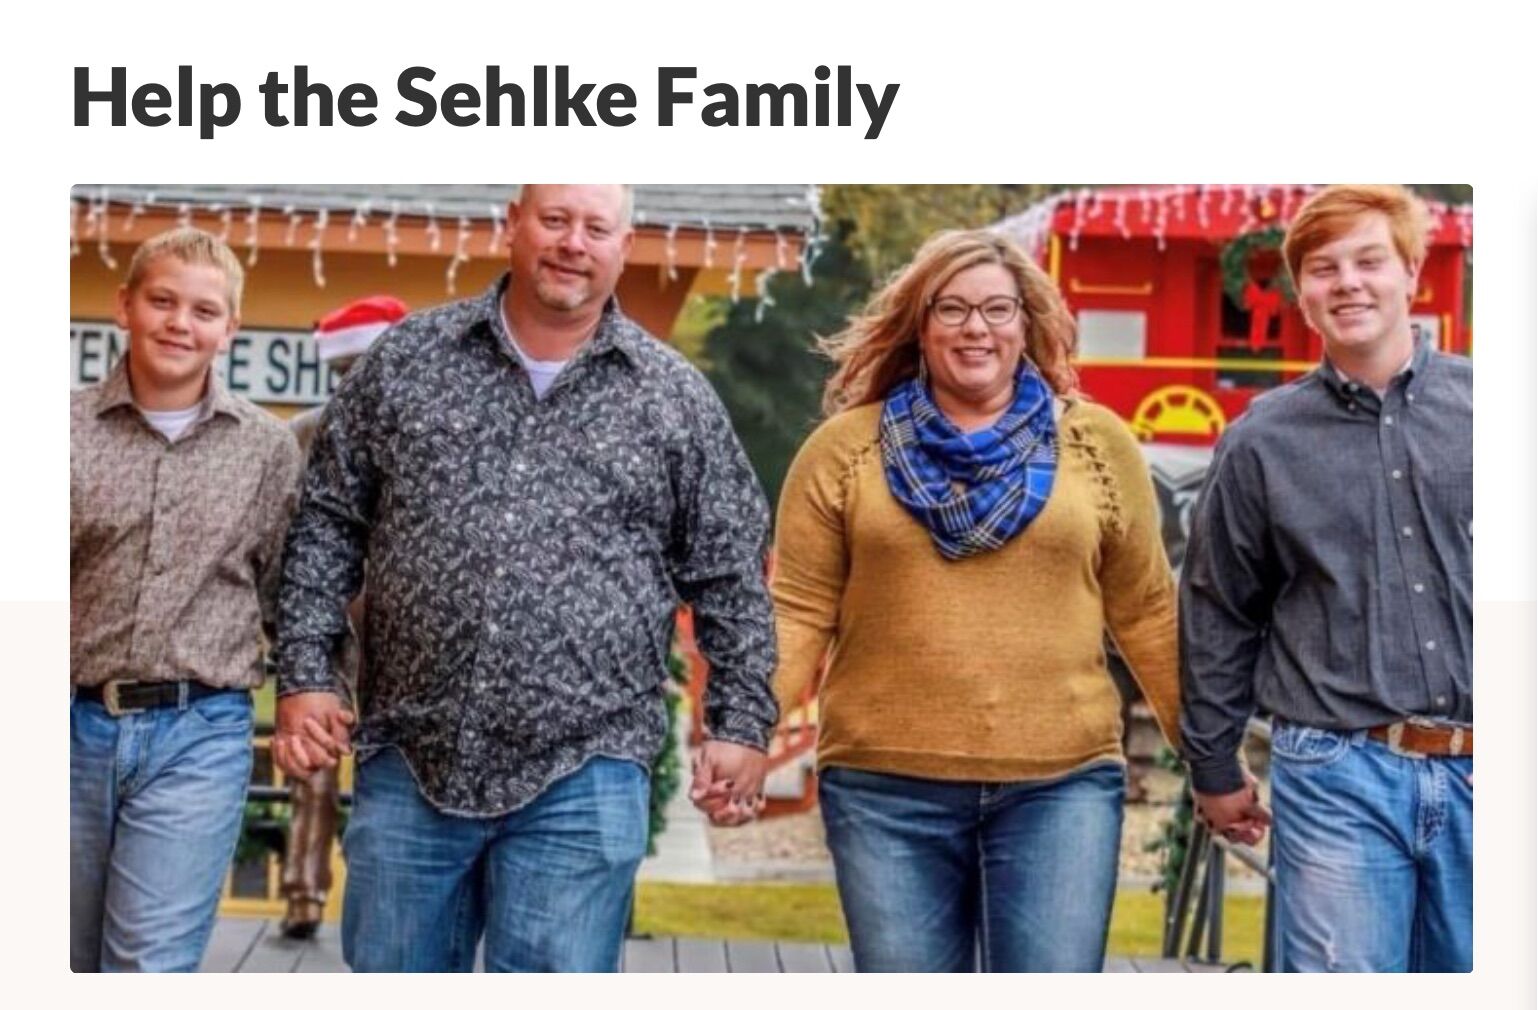 The Sehlke family in happier days.